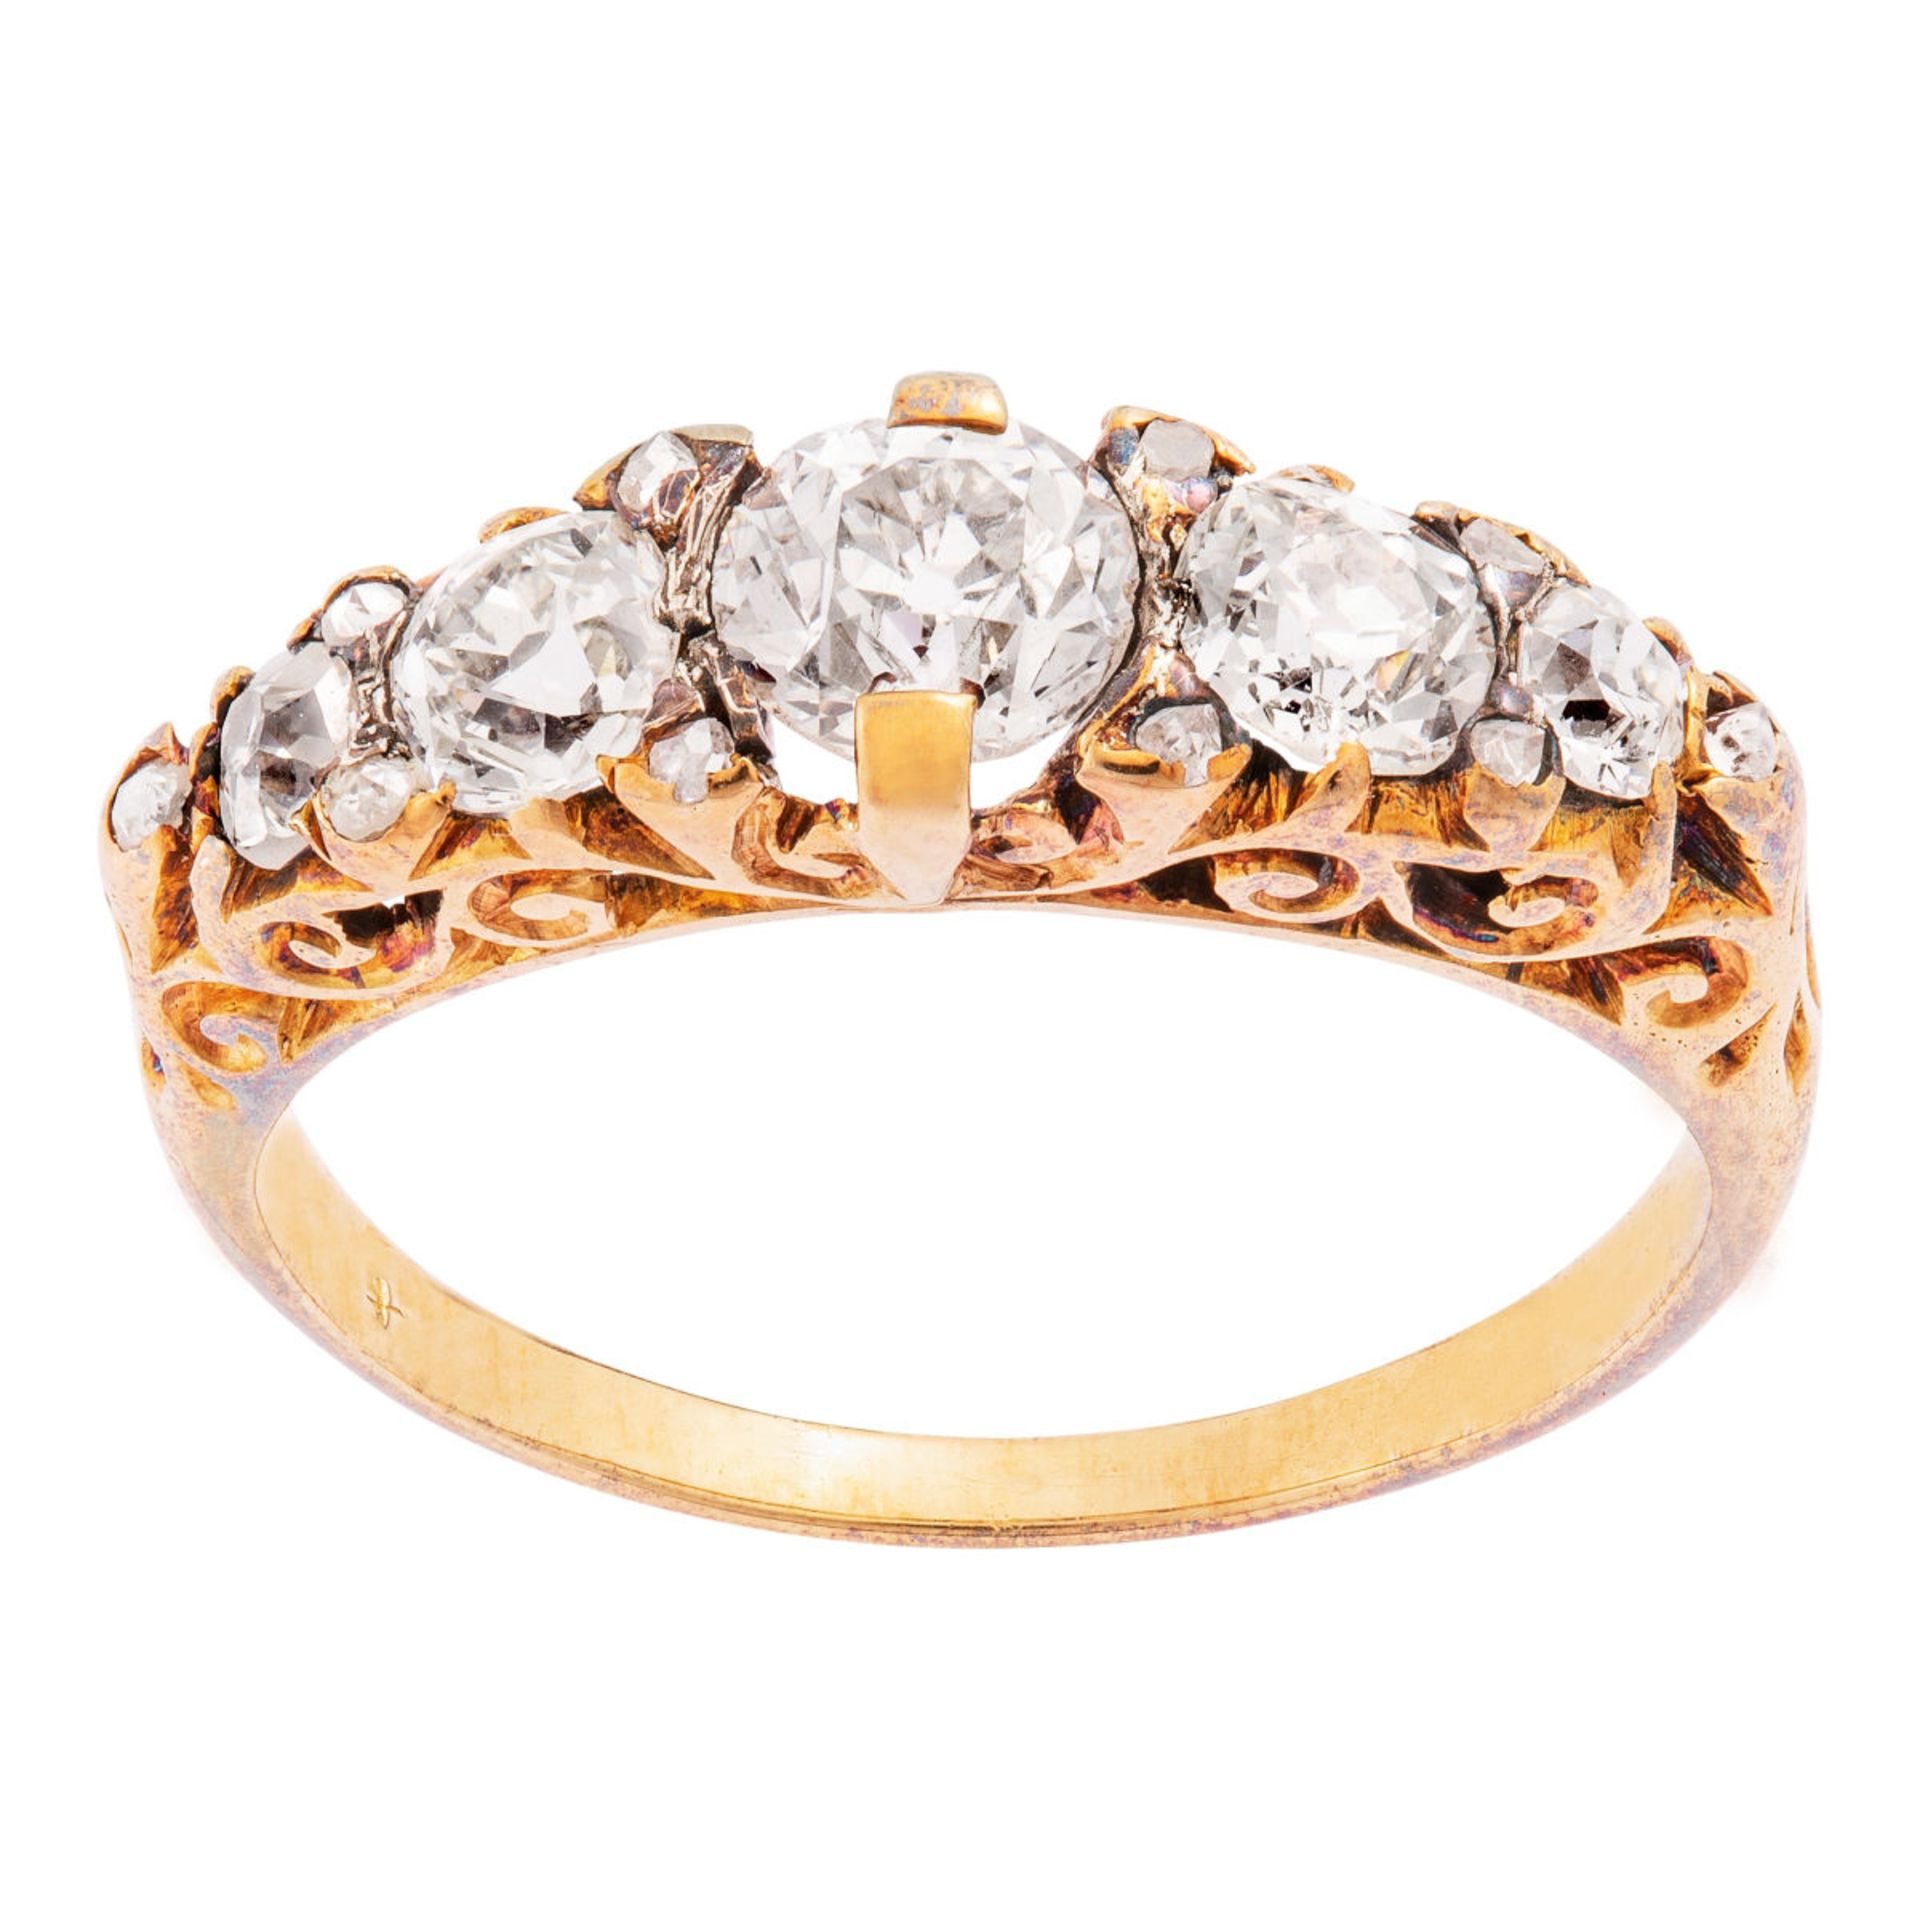 Victorian rivière ring with diamonds